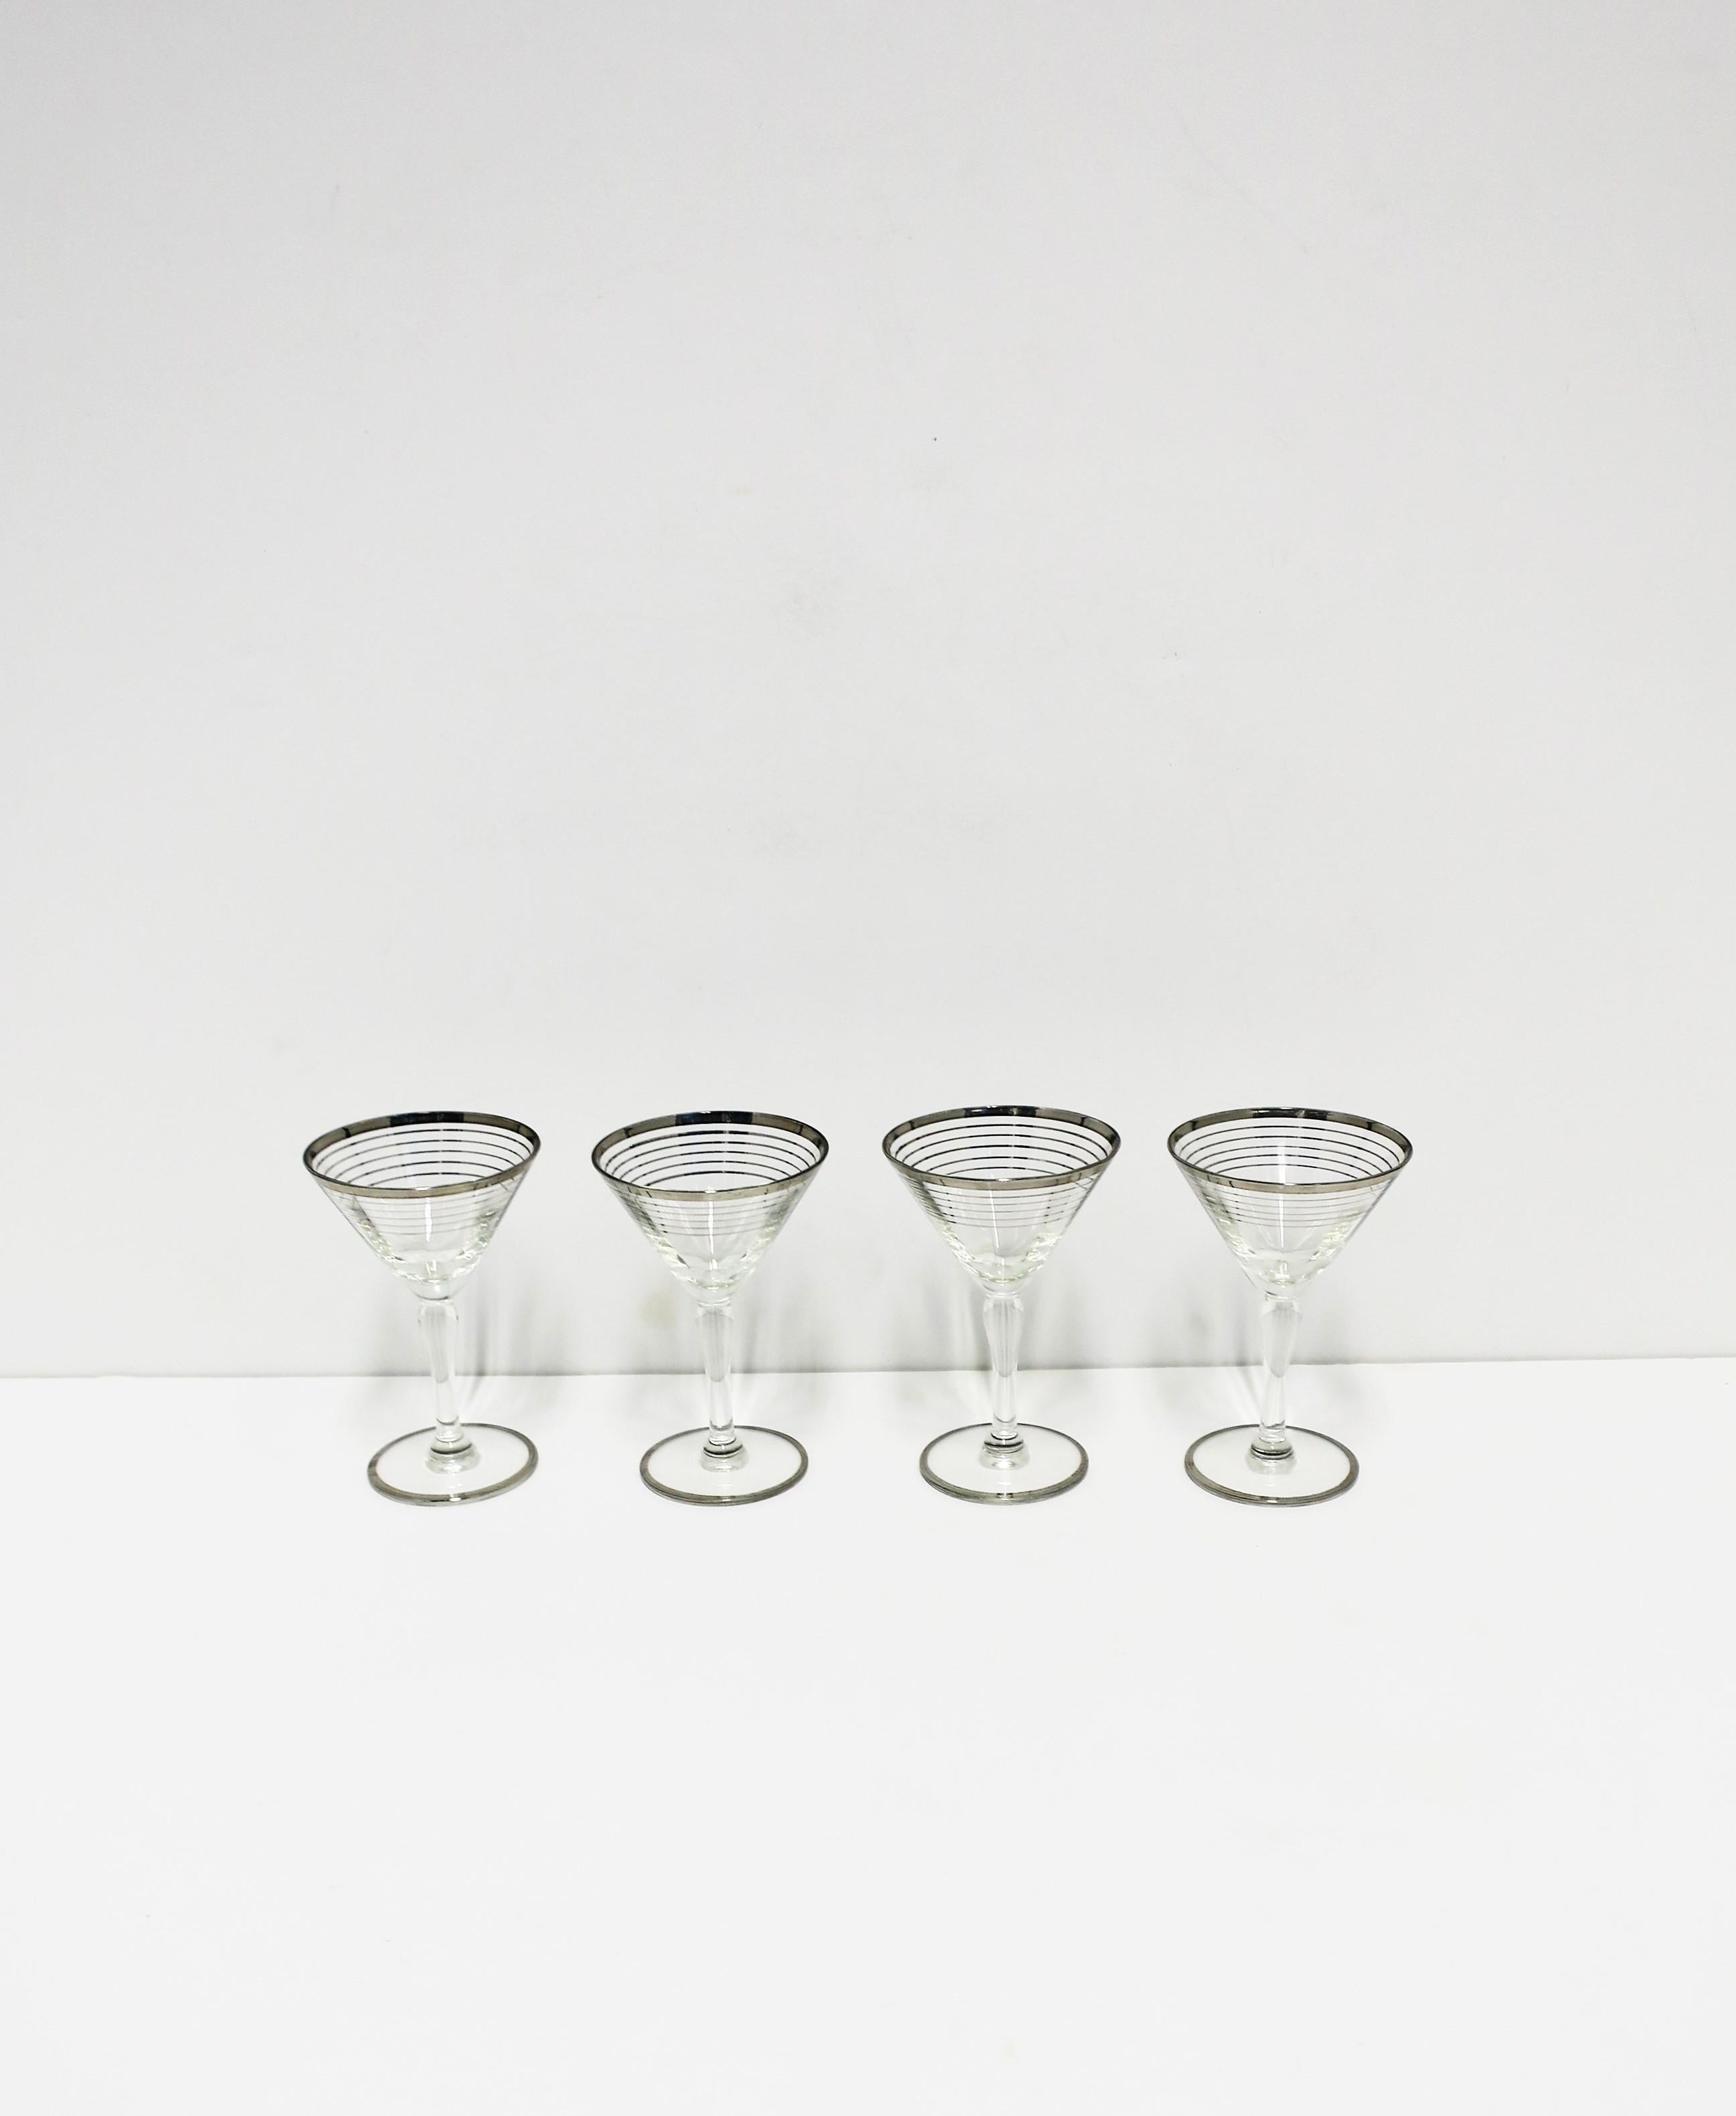 A beautiful set of four (4) Mid-Century Modern cocktail or martini glasses with silver detail, circa mid-20th century, Europe. A beautiful set for entertaining, a bar, bar cart, etc., or to enjoy every day. Glasses are on the smaller side.